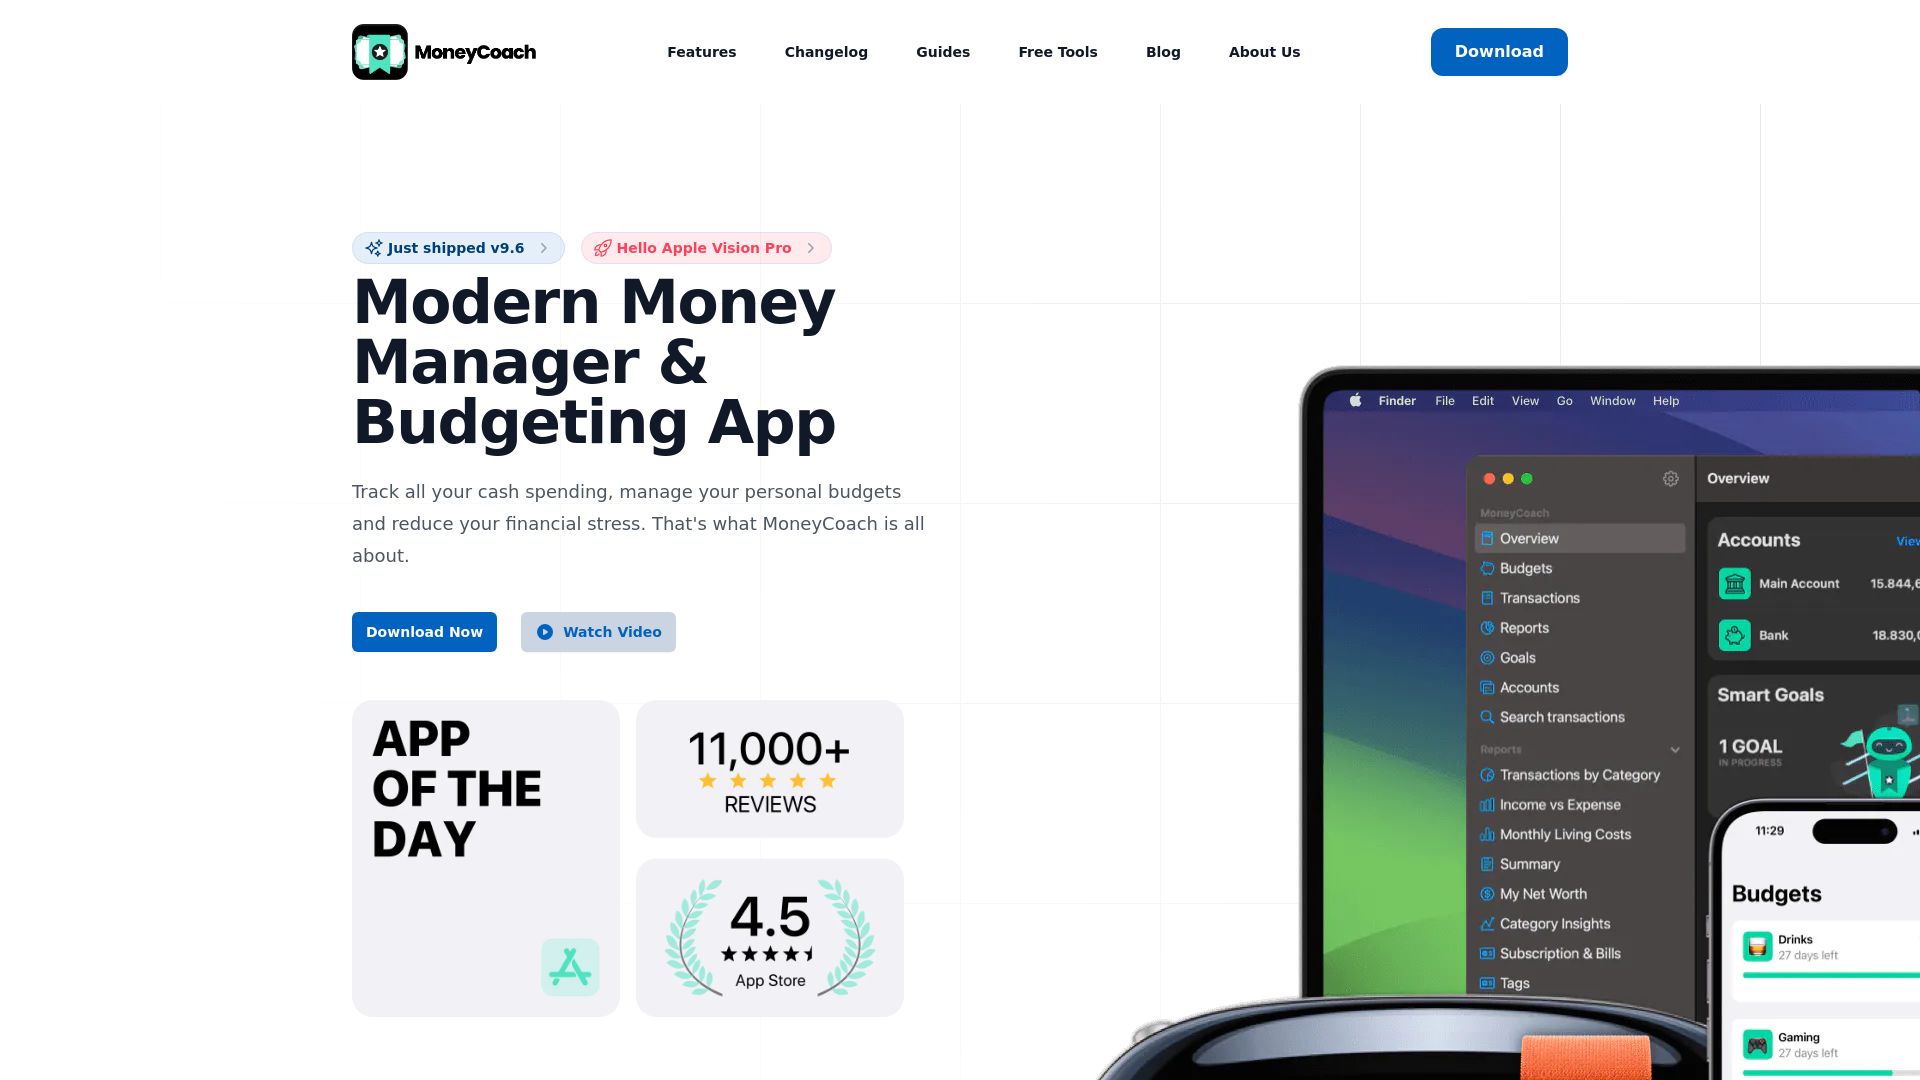 MoneyCoach - Modern Money Manager And Budgeting App